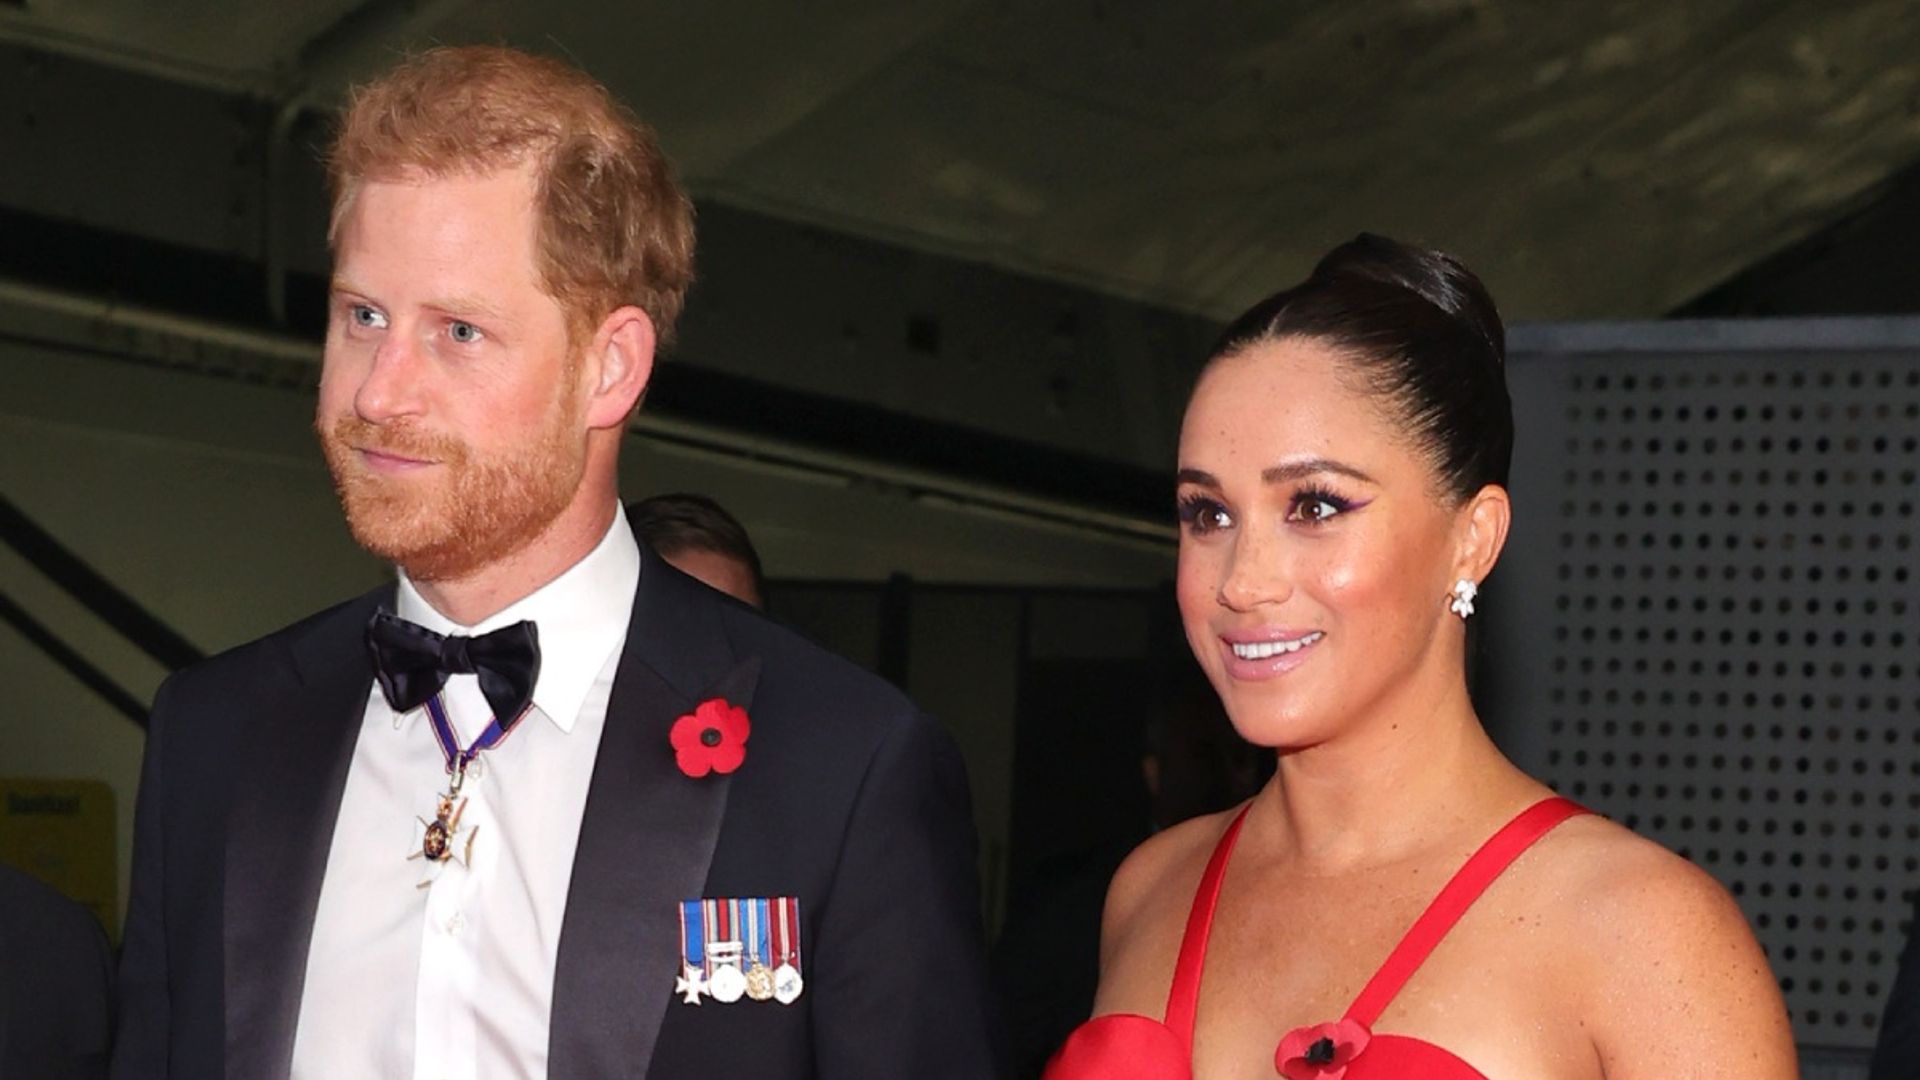 Prince Harry jokes he is 'living the American dream' as Meghan Markle joins him for military gala